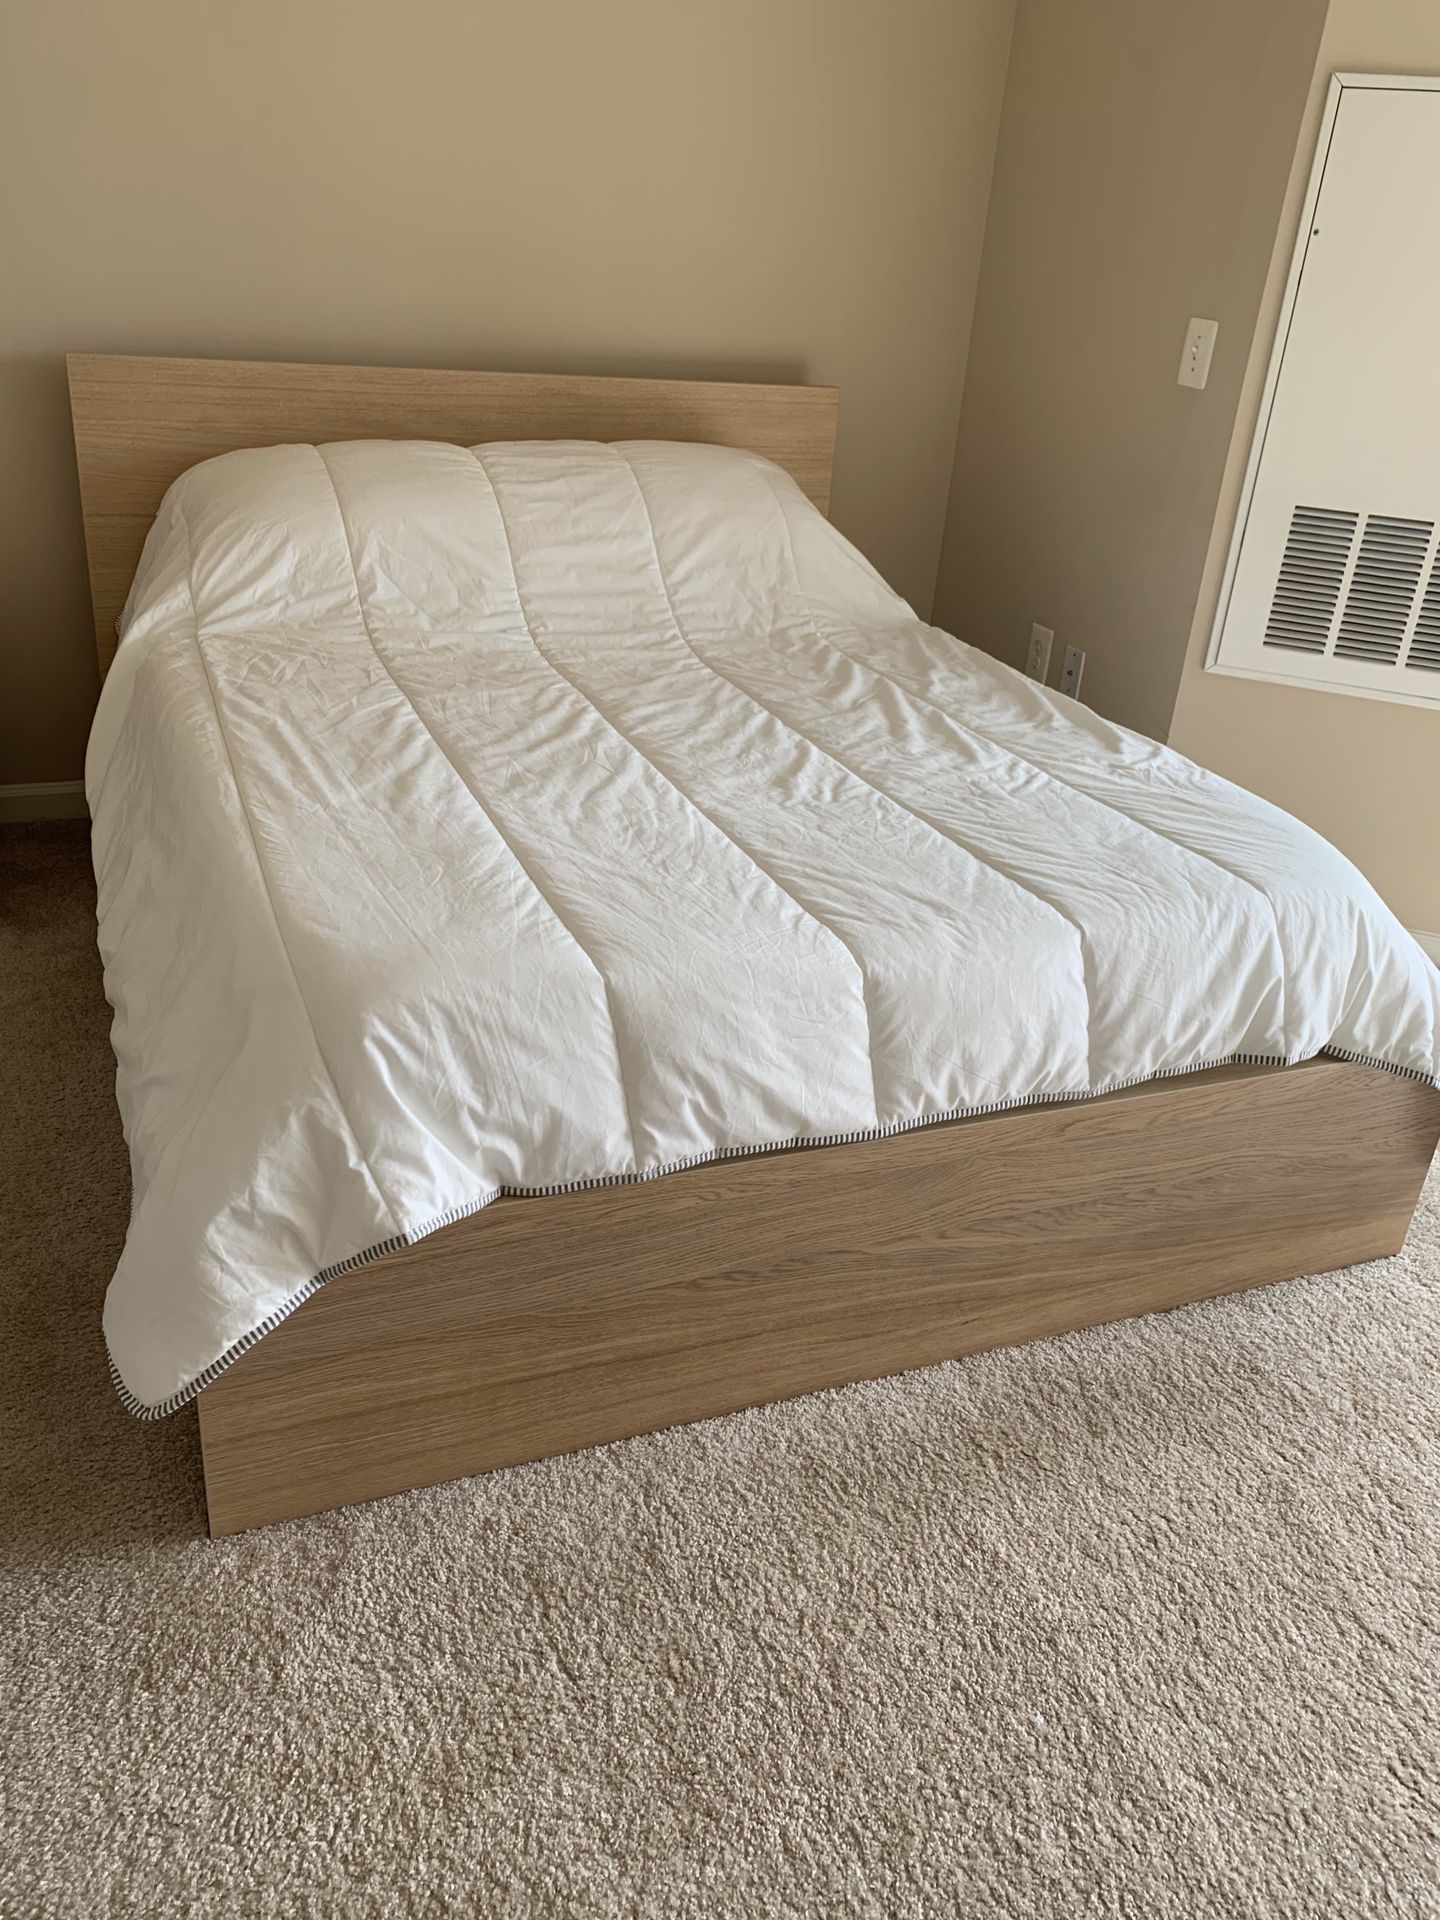 White oak -IKEA Queen size bed with night stand , mattress  & memory foam mattress pad in perfect condition like new